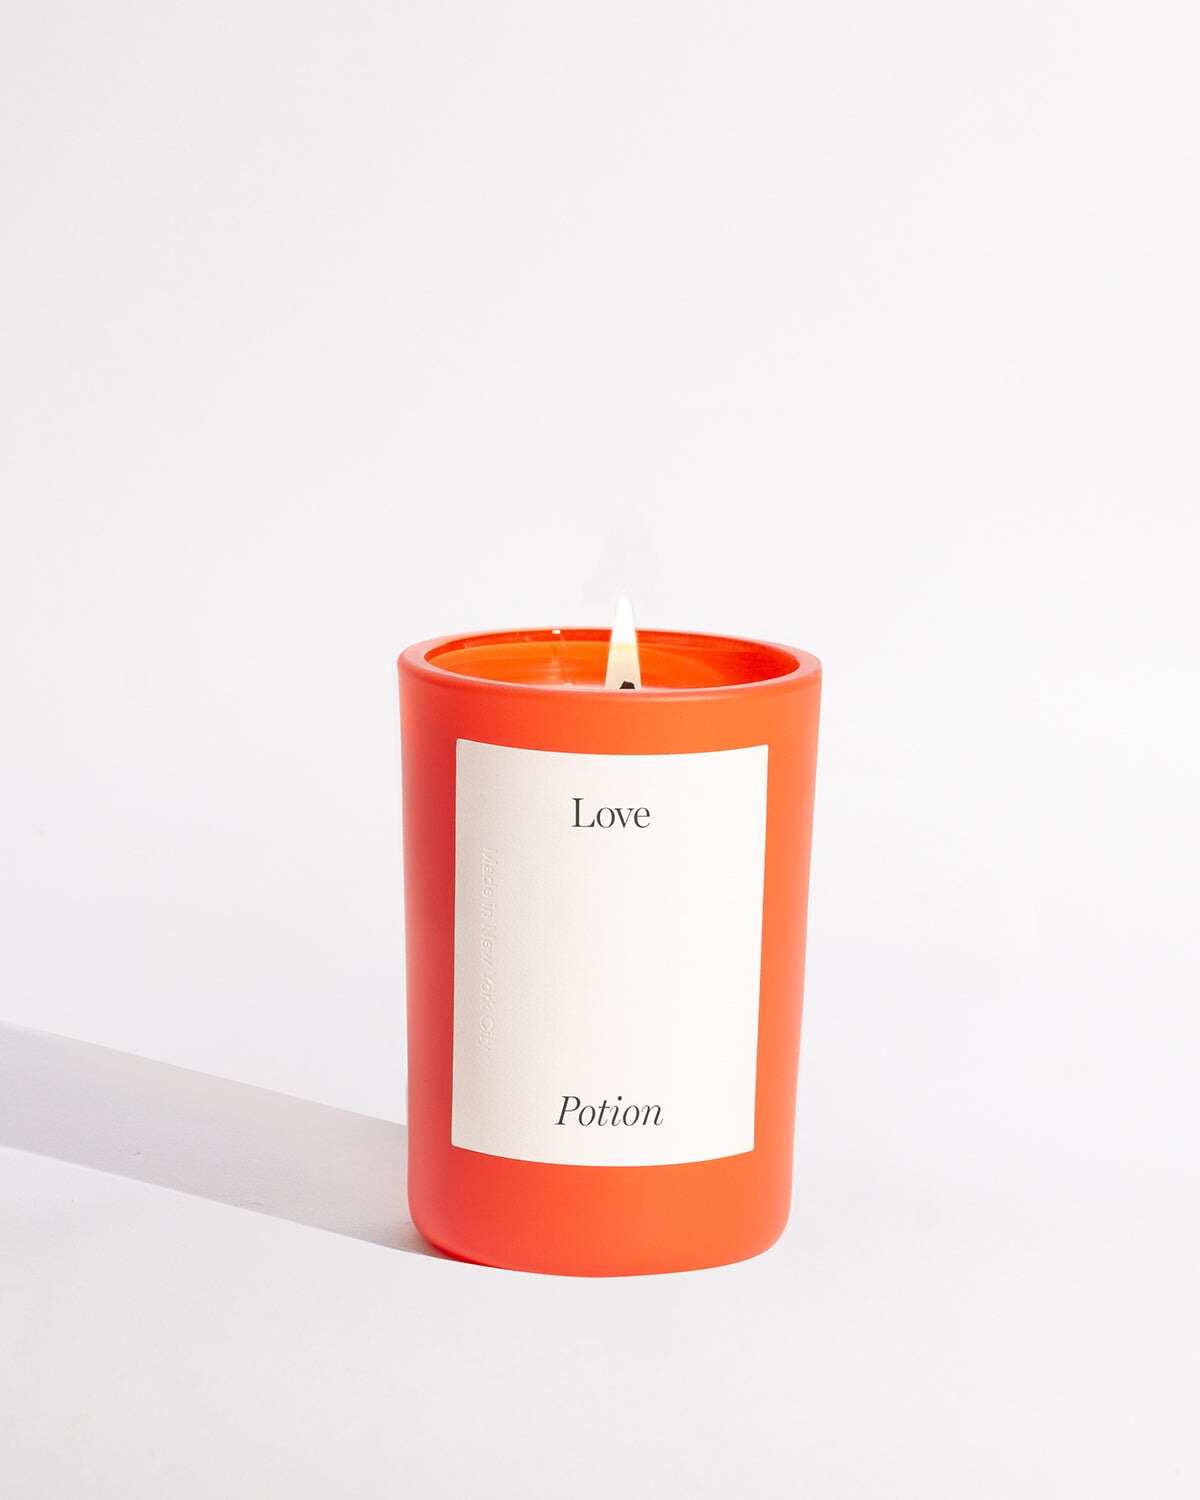 Subscriber Edition Love Potion Candle Limited Edition Brooklyn Candle Studio 